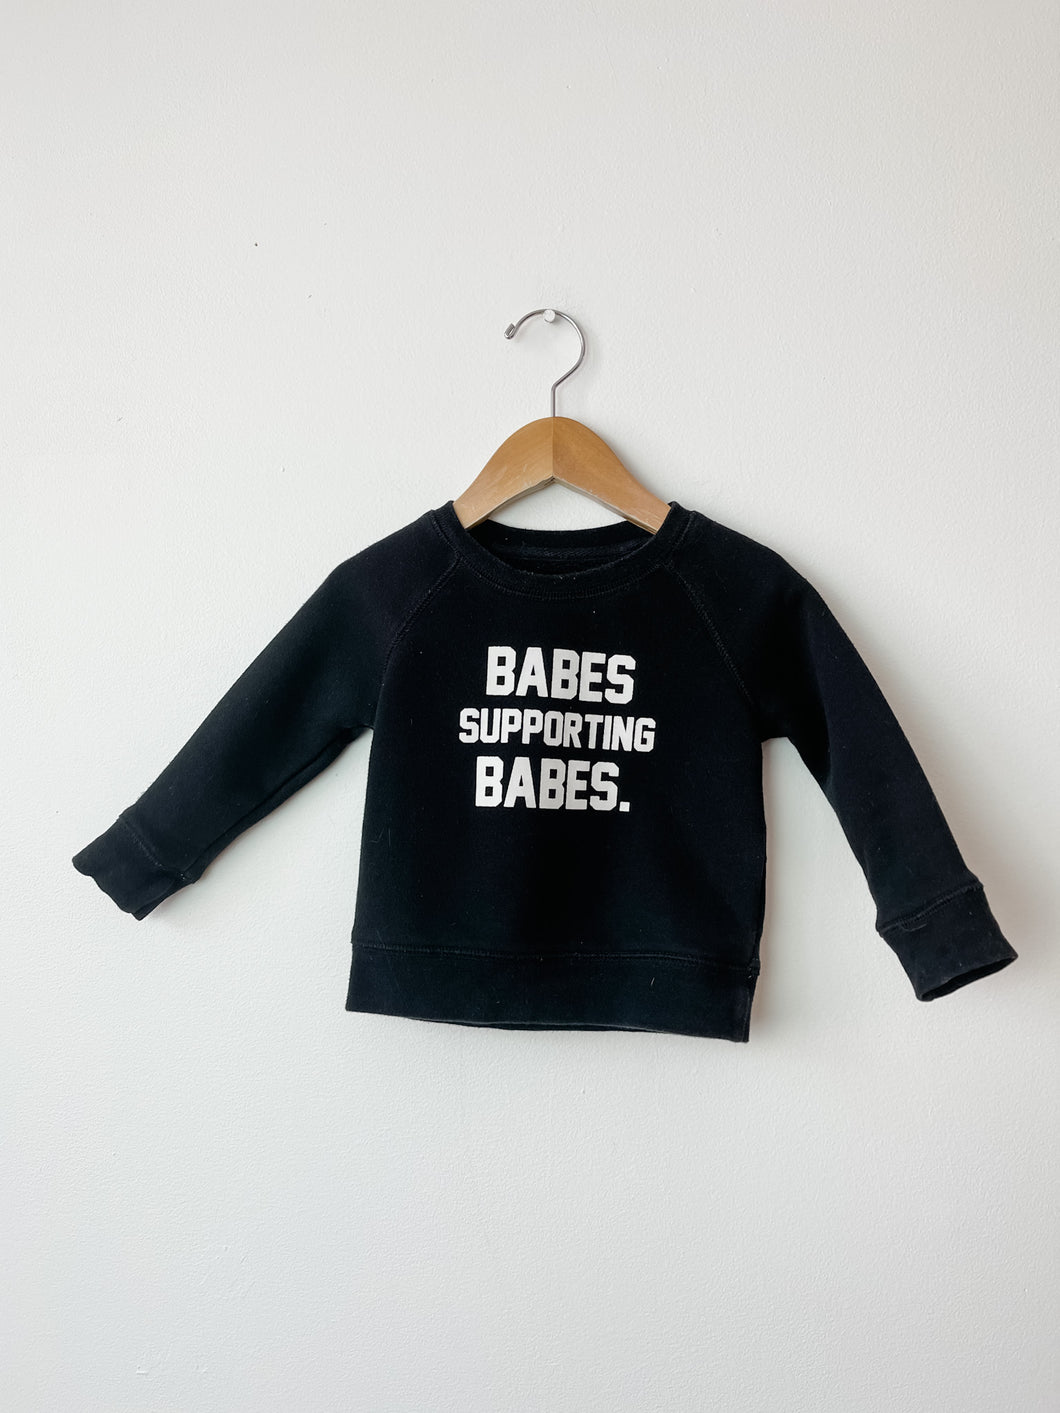 Black Brunette The Label Sweater Size 12-18 Months